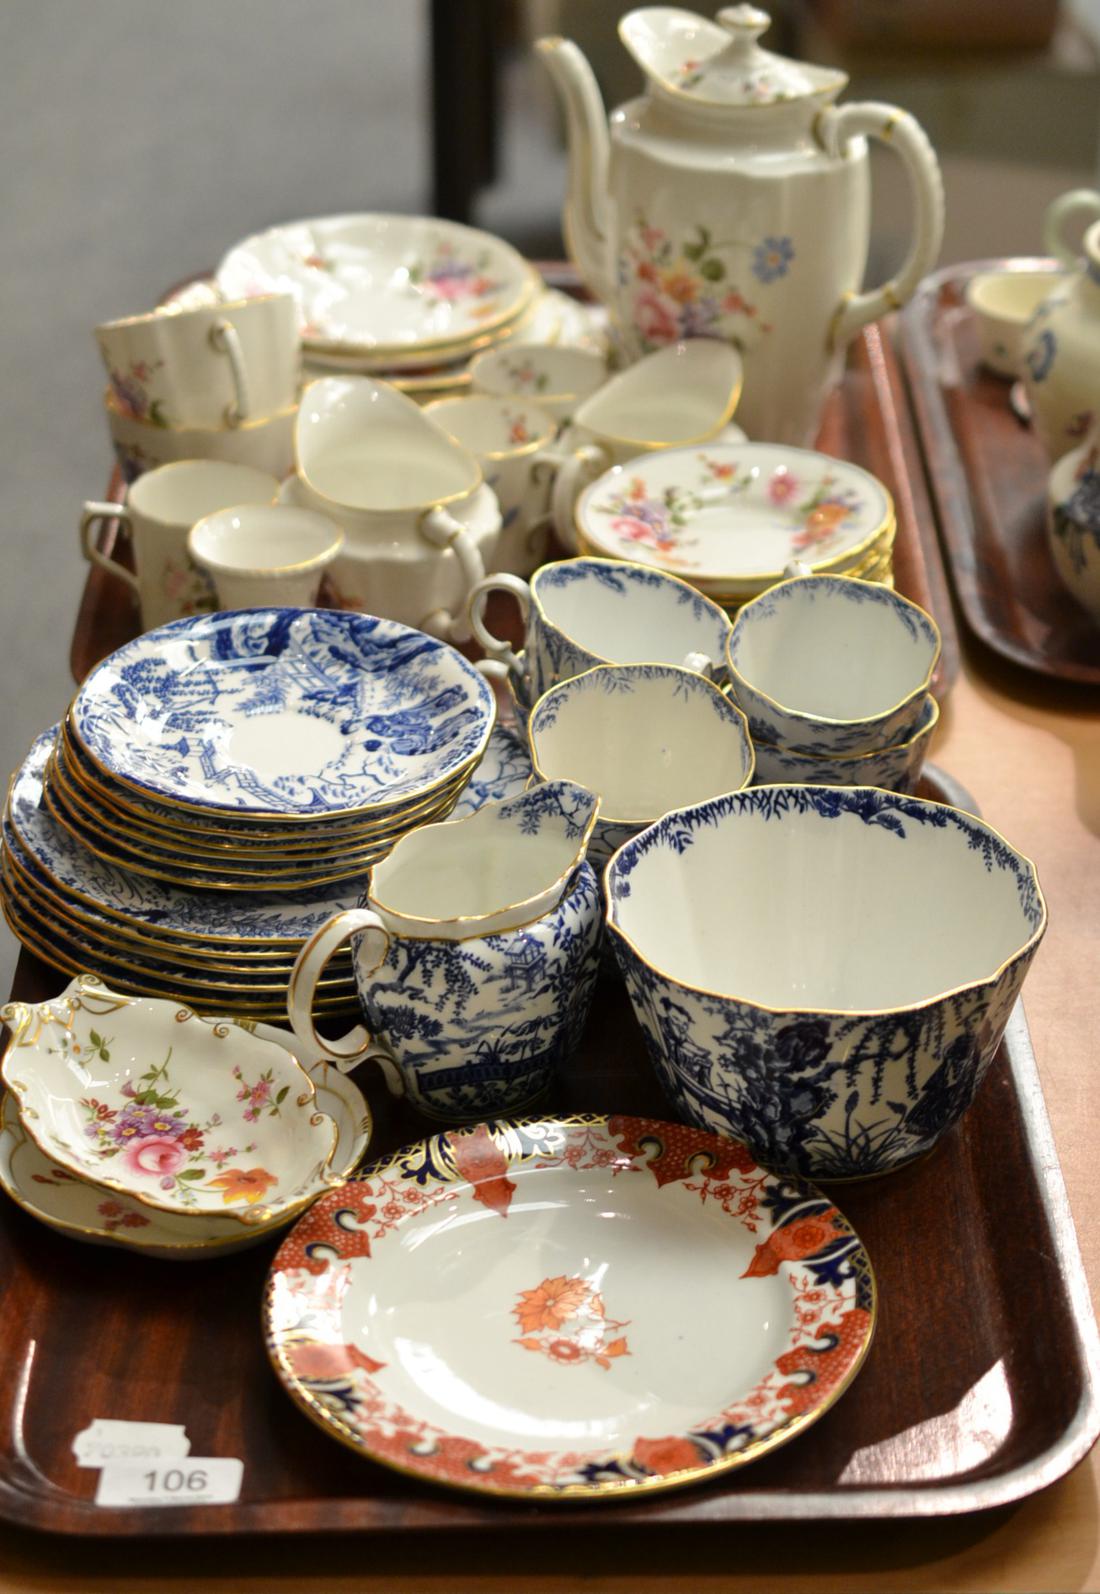 Collection of Royal Crown Derby Derby Posies china and similar collection of Mikado pattern china